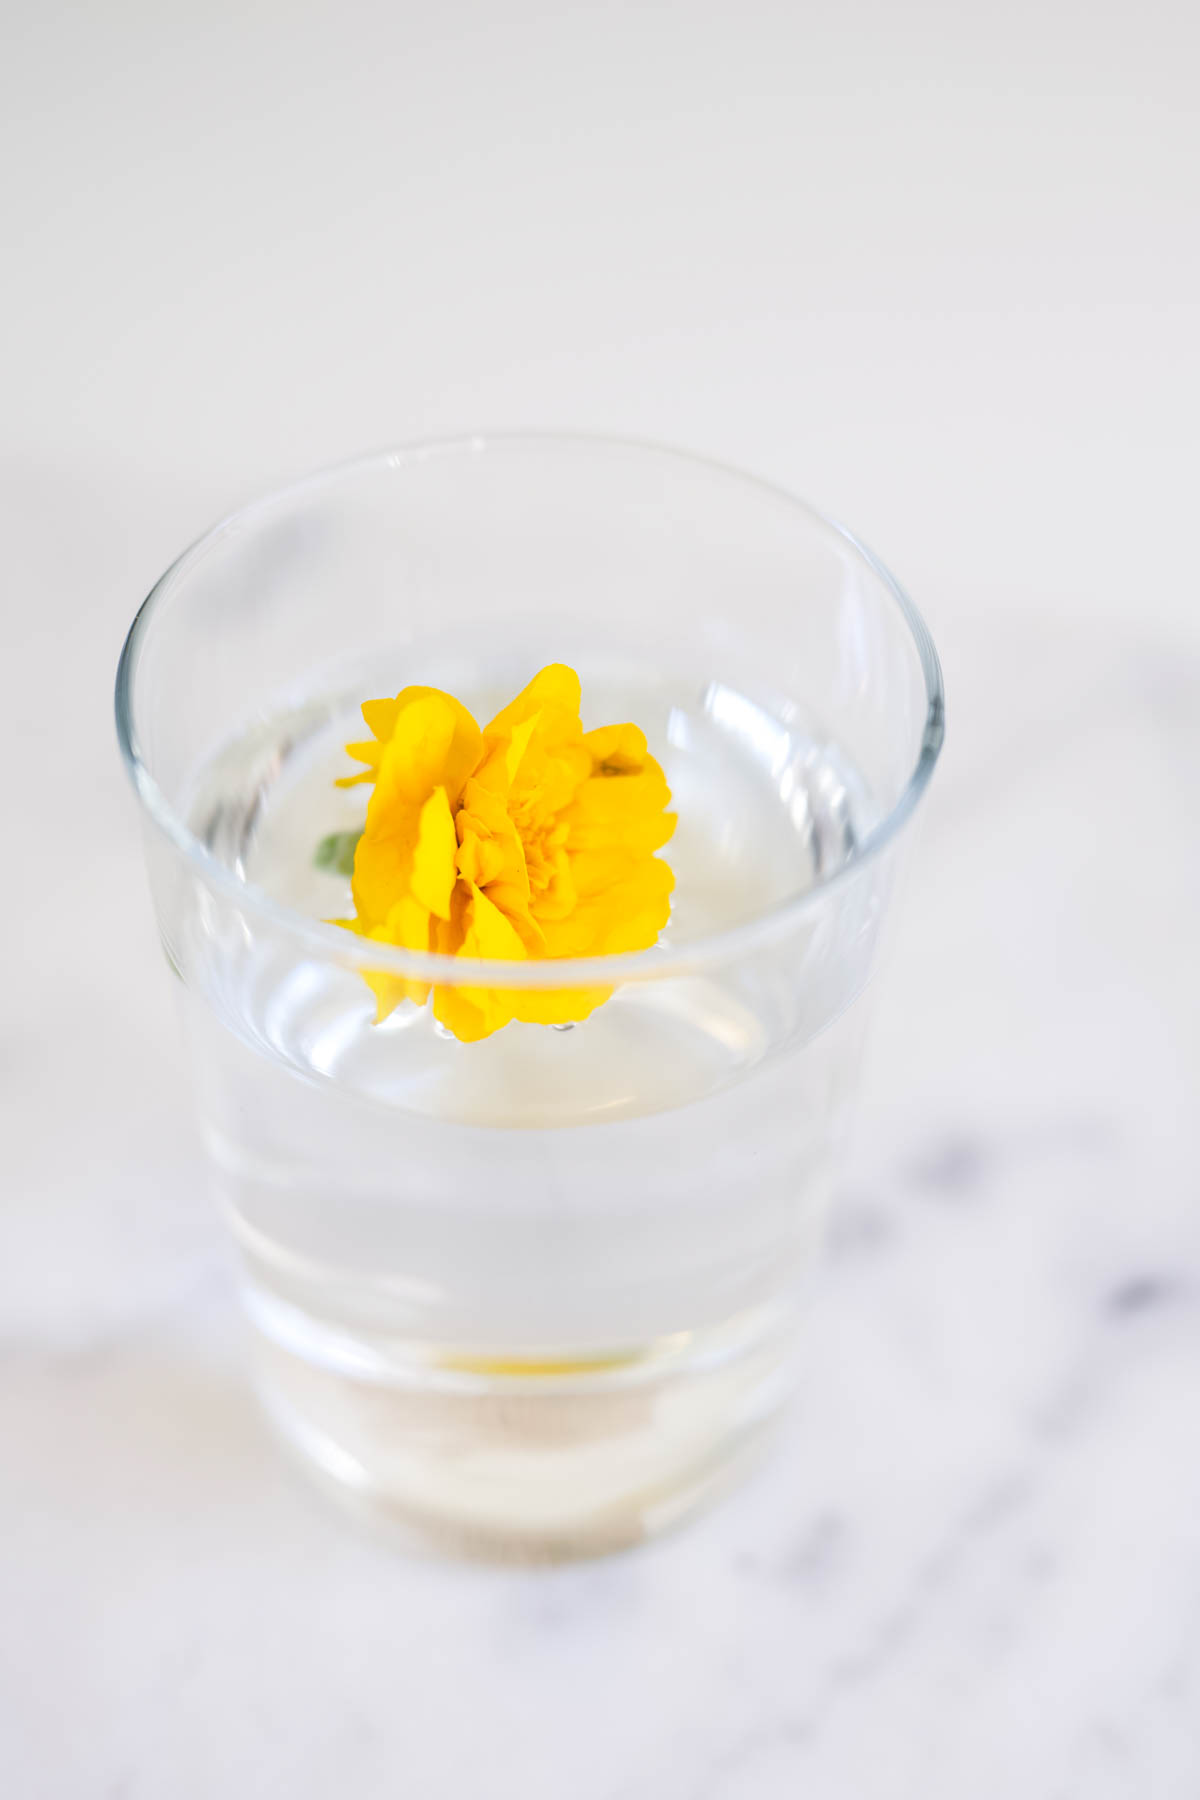 A glass of water on the counter with a flower in it.